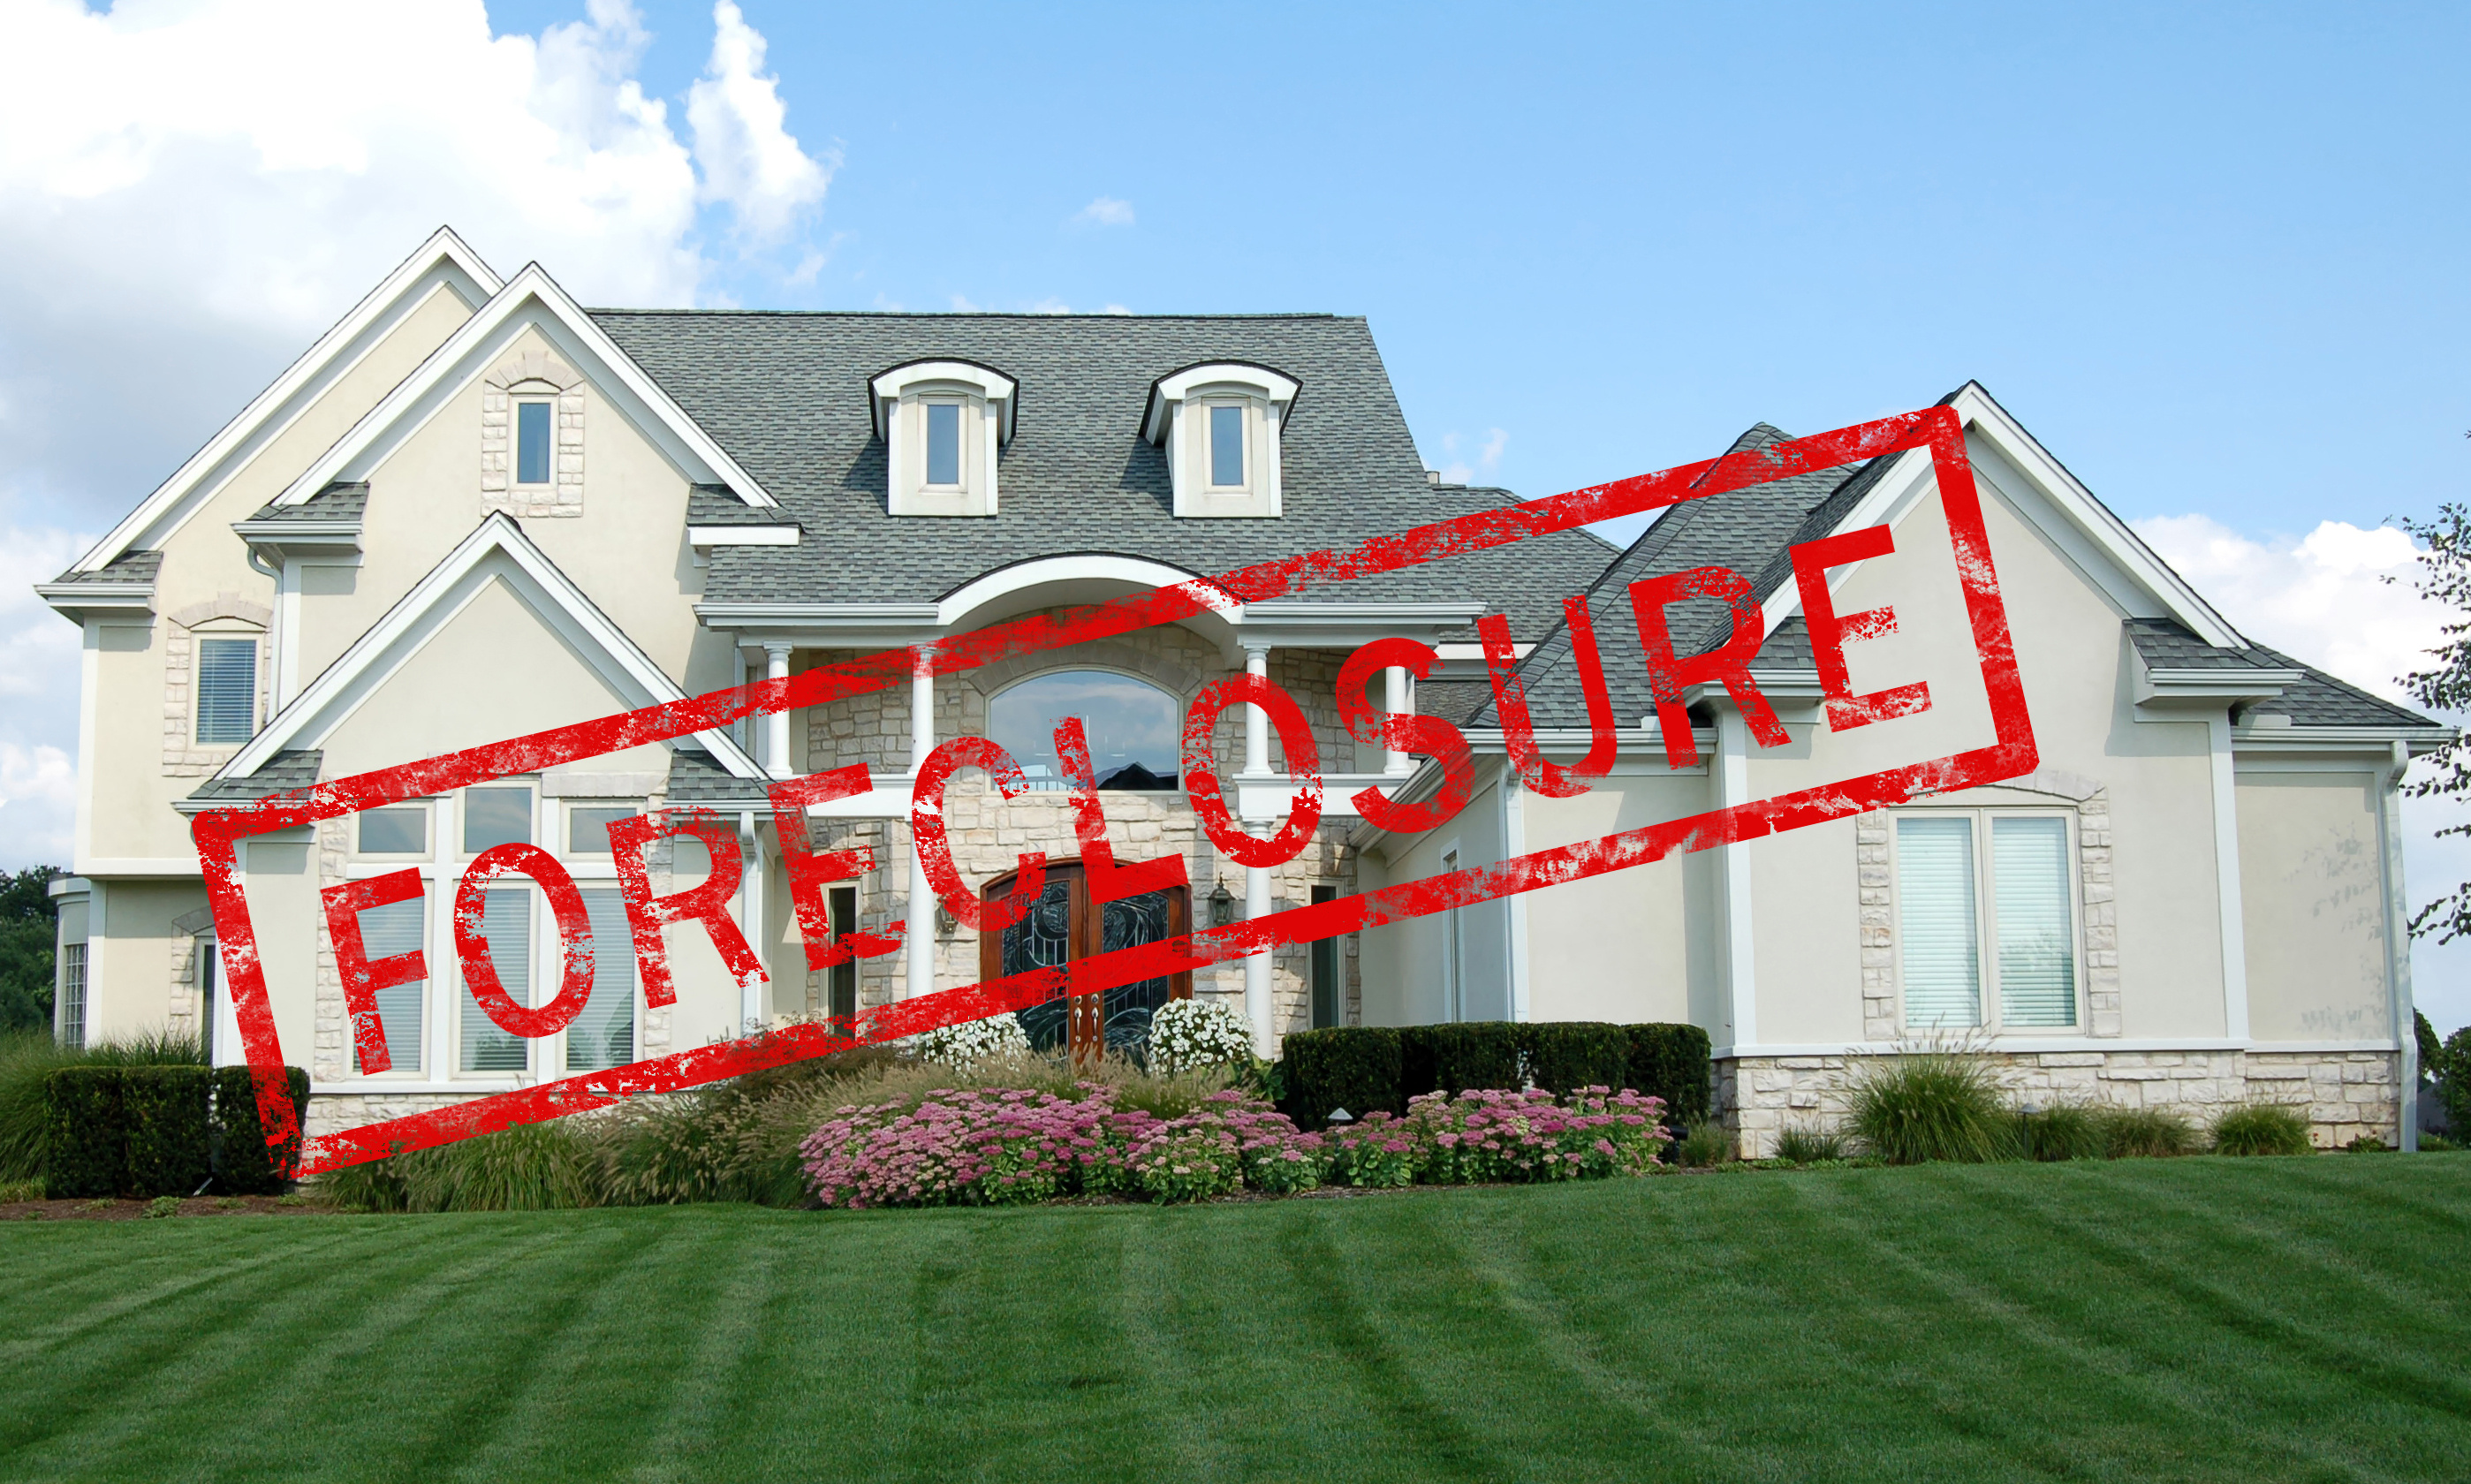 Call Perry & Associates Appraisal Company when you need appraisals for Marion foreclosures